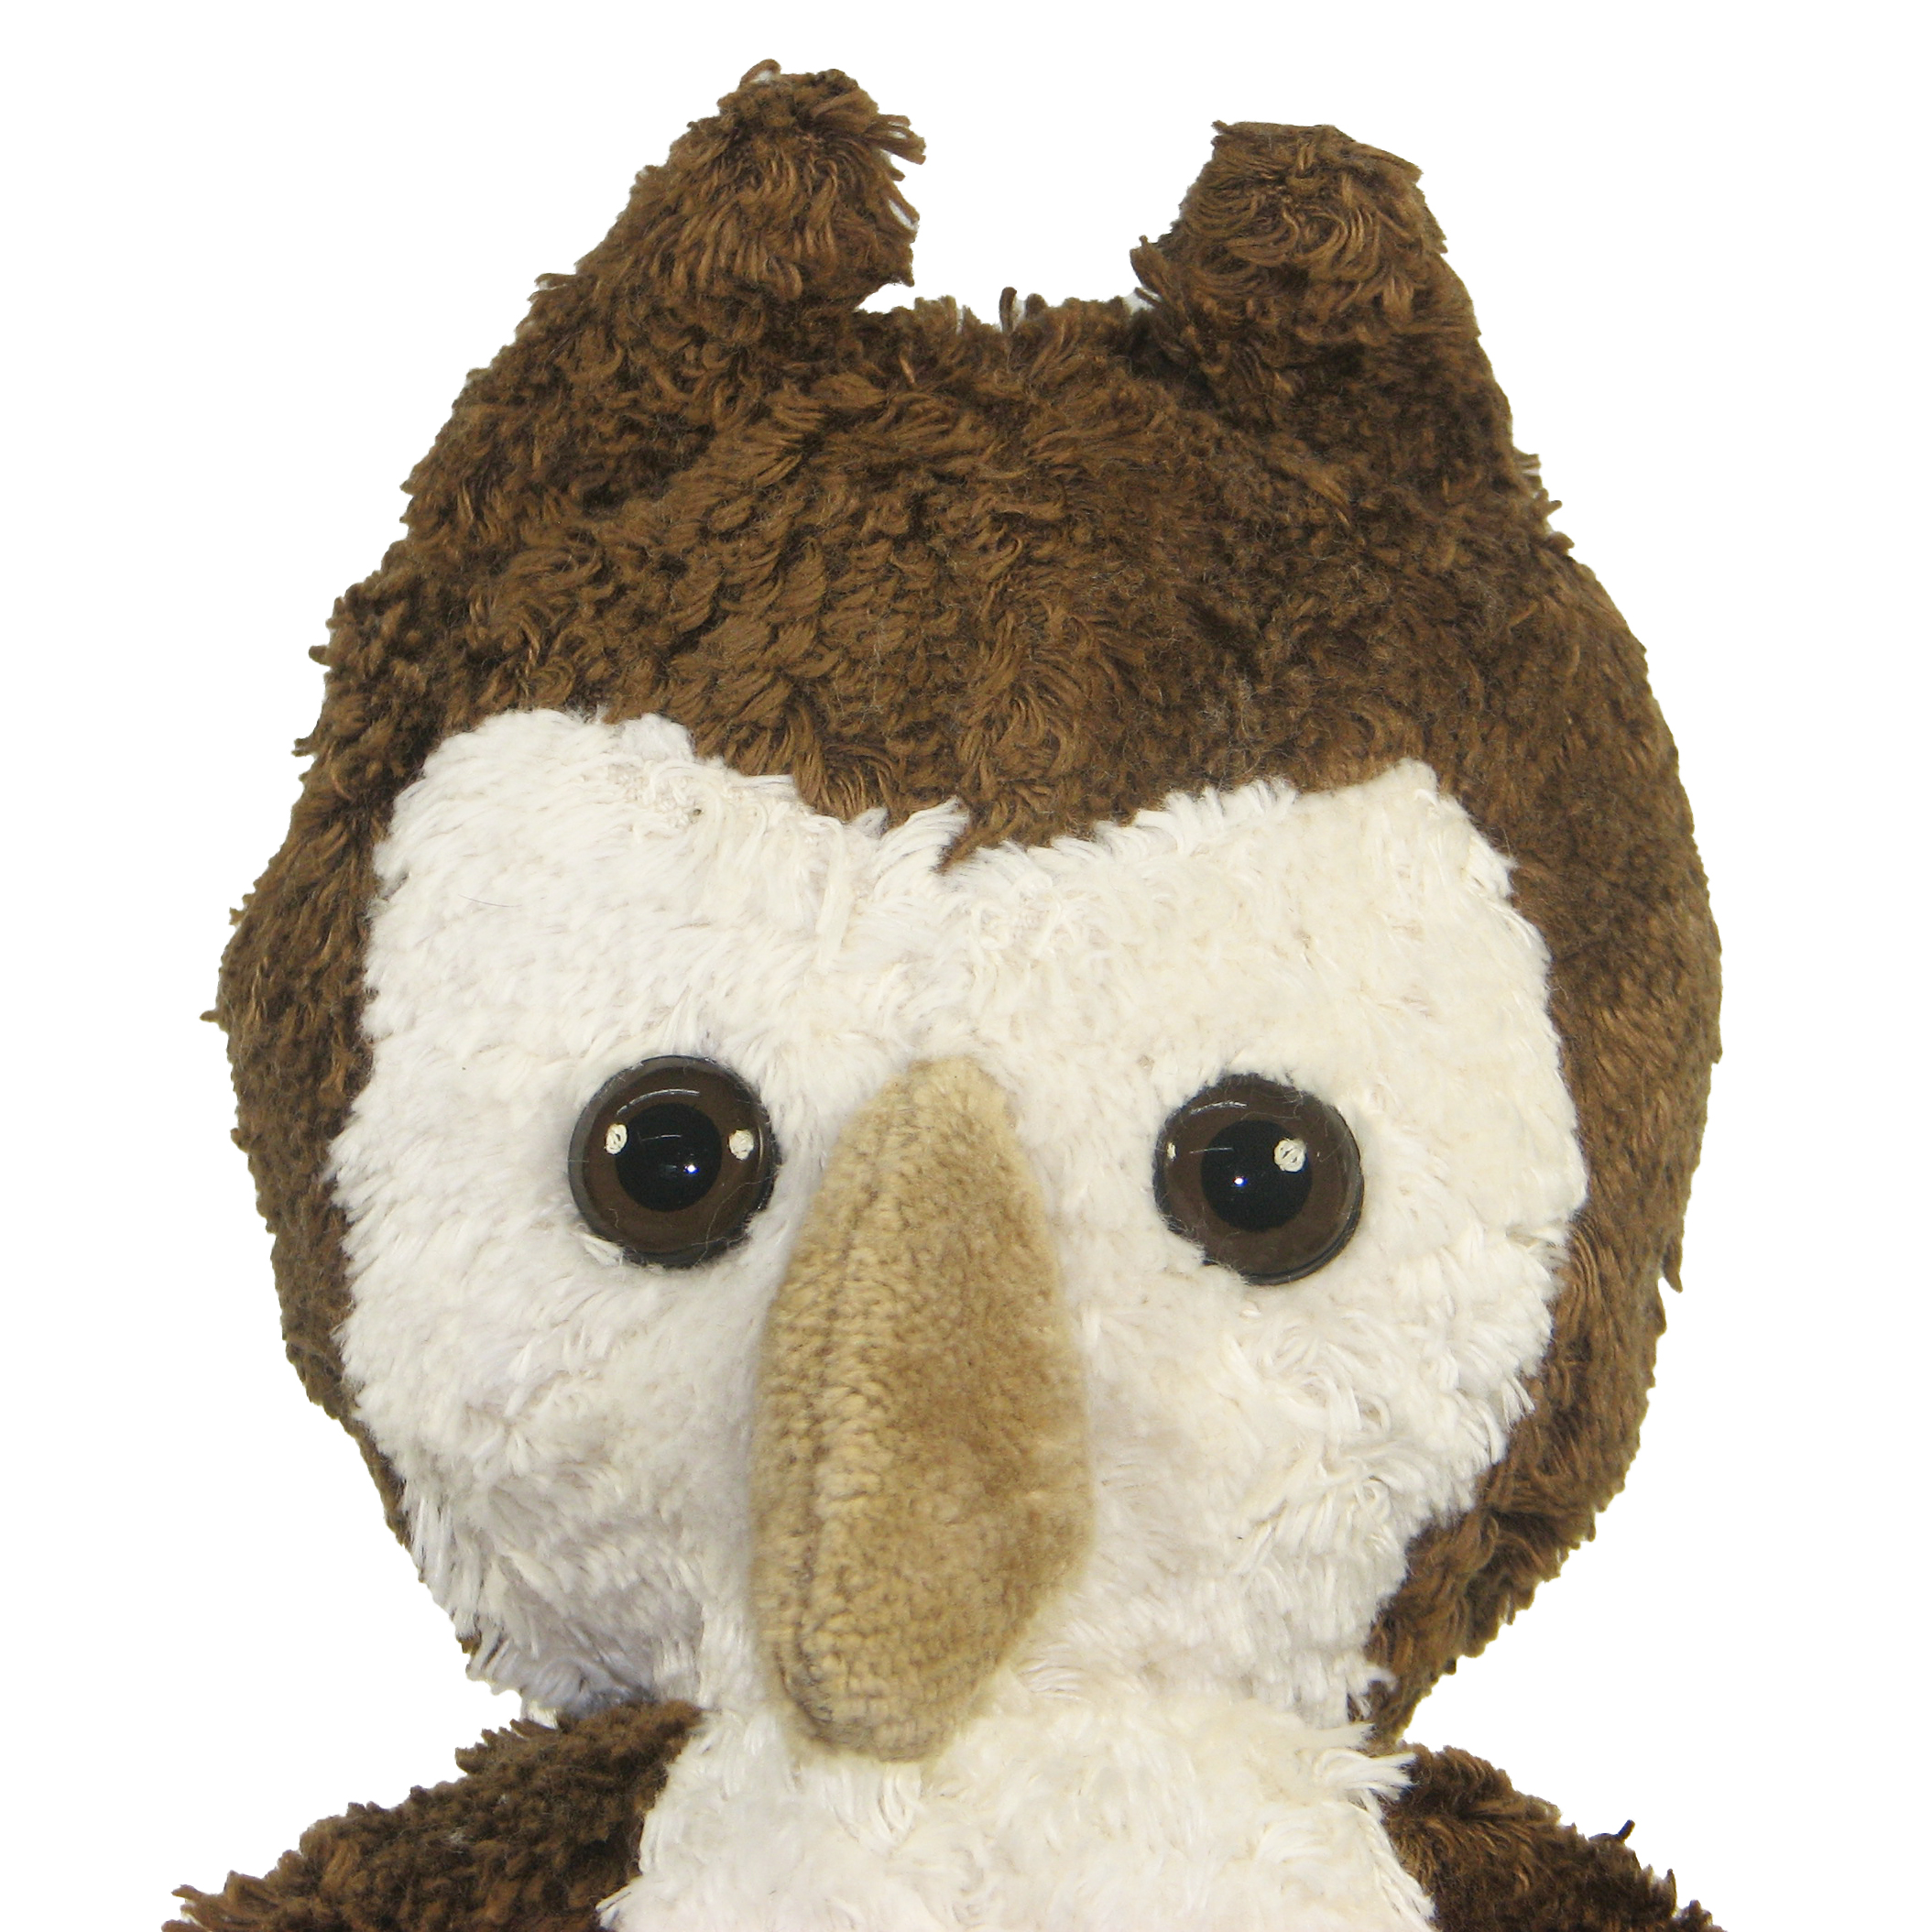 Hand puppet brown owl - made of natural material - by Kallisto